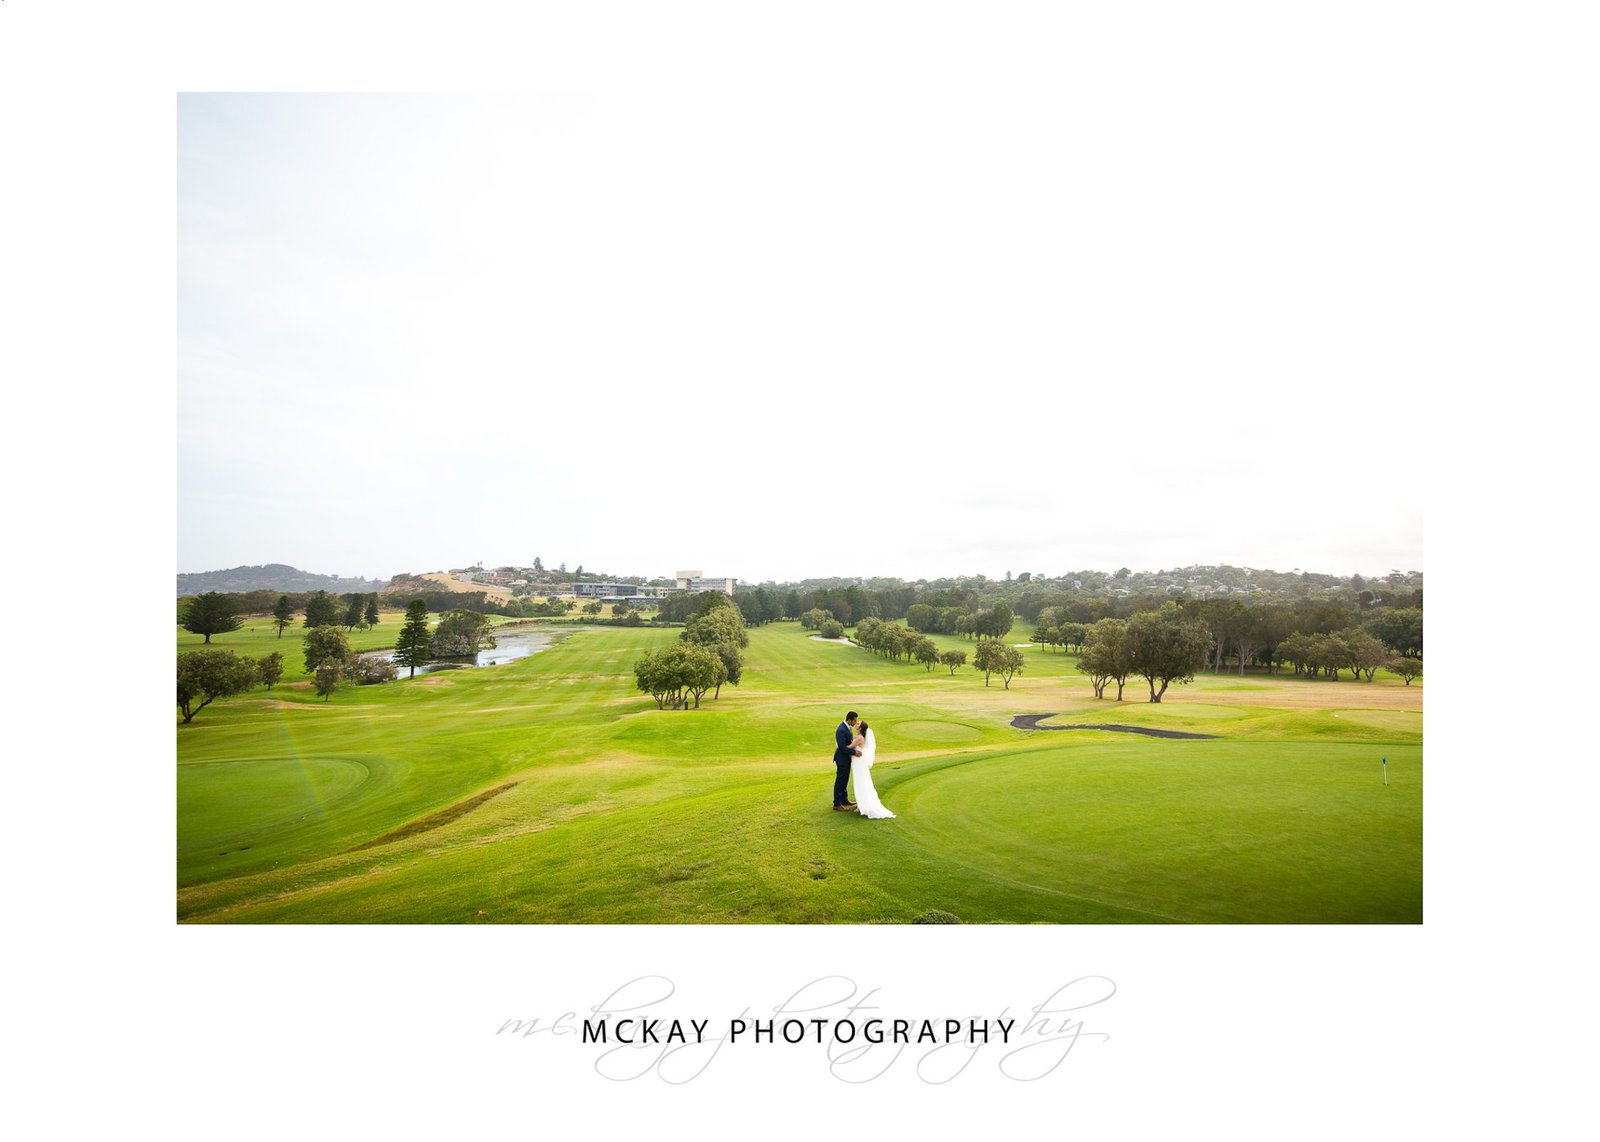 Super wide angle of wedding at Mona Vale Golf Club